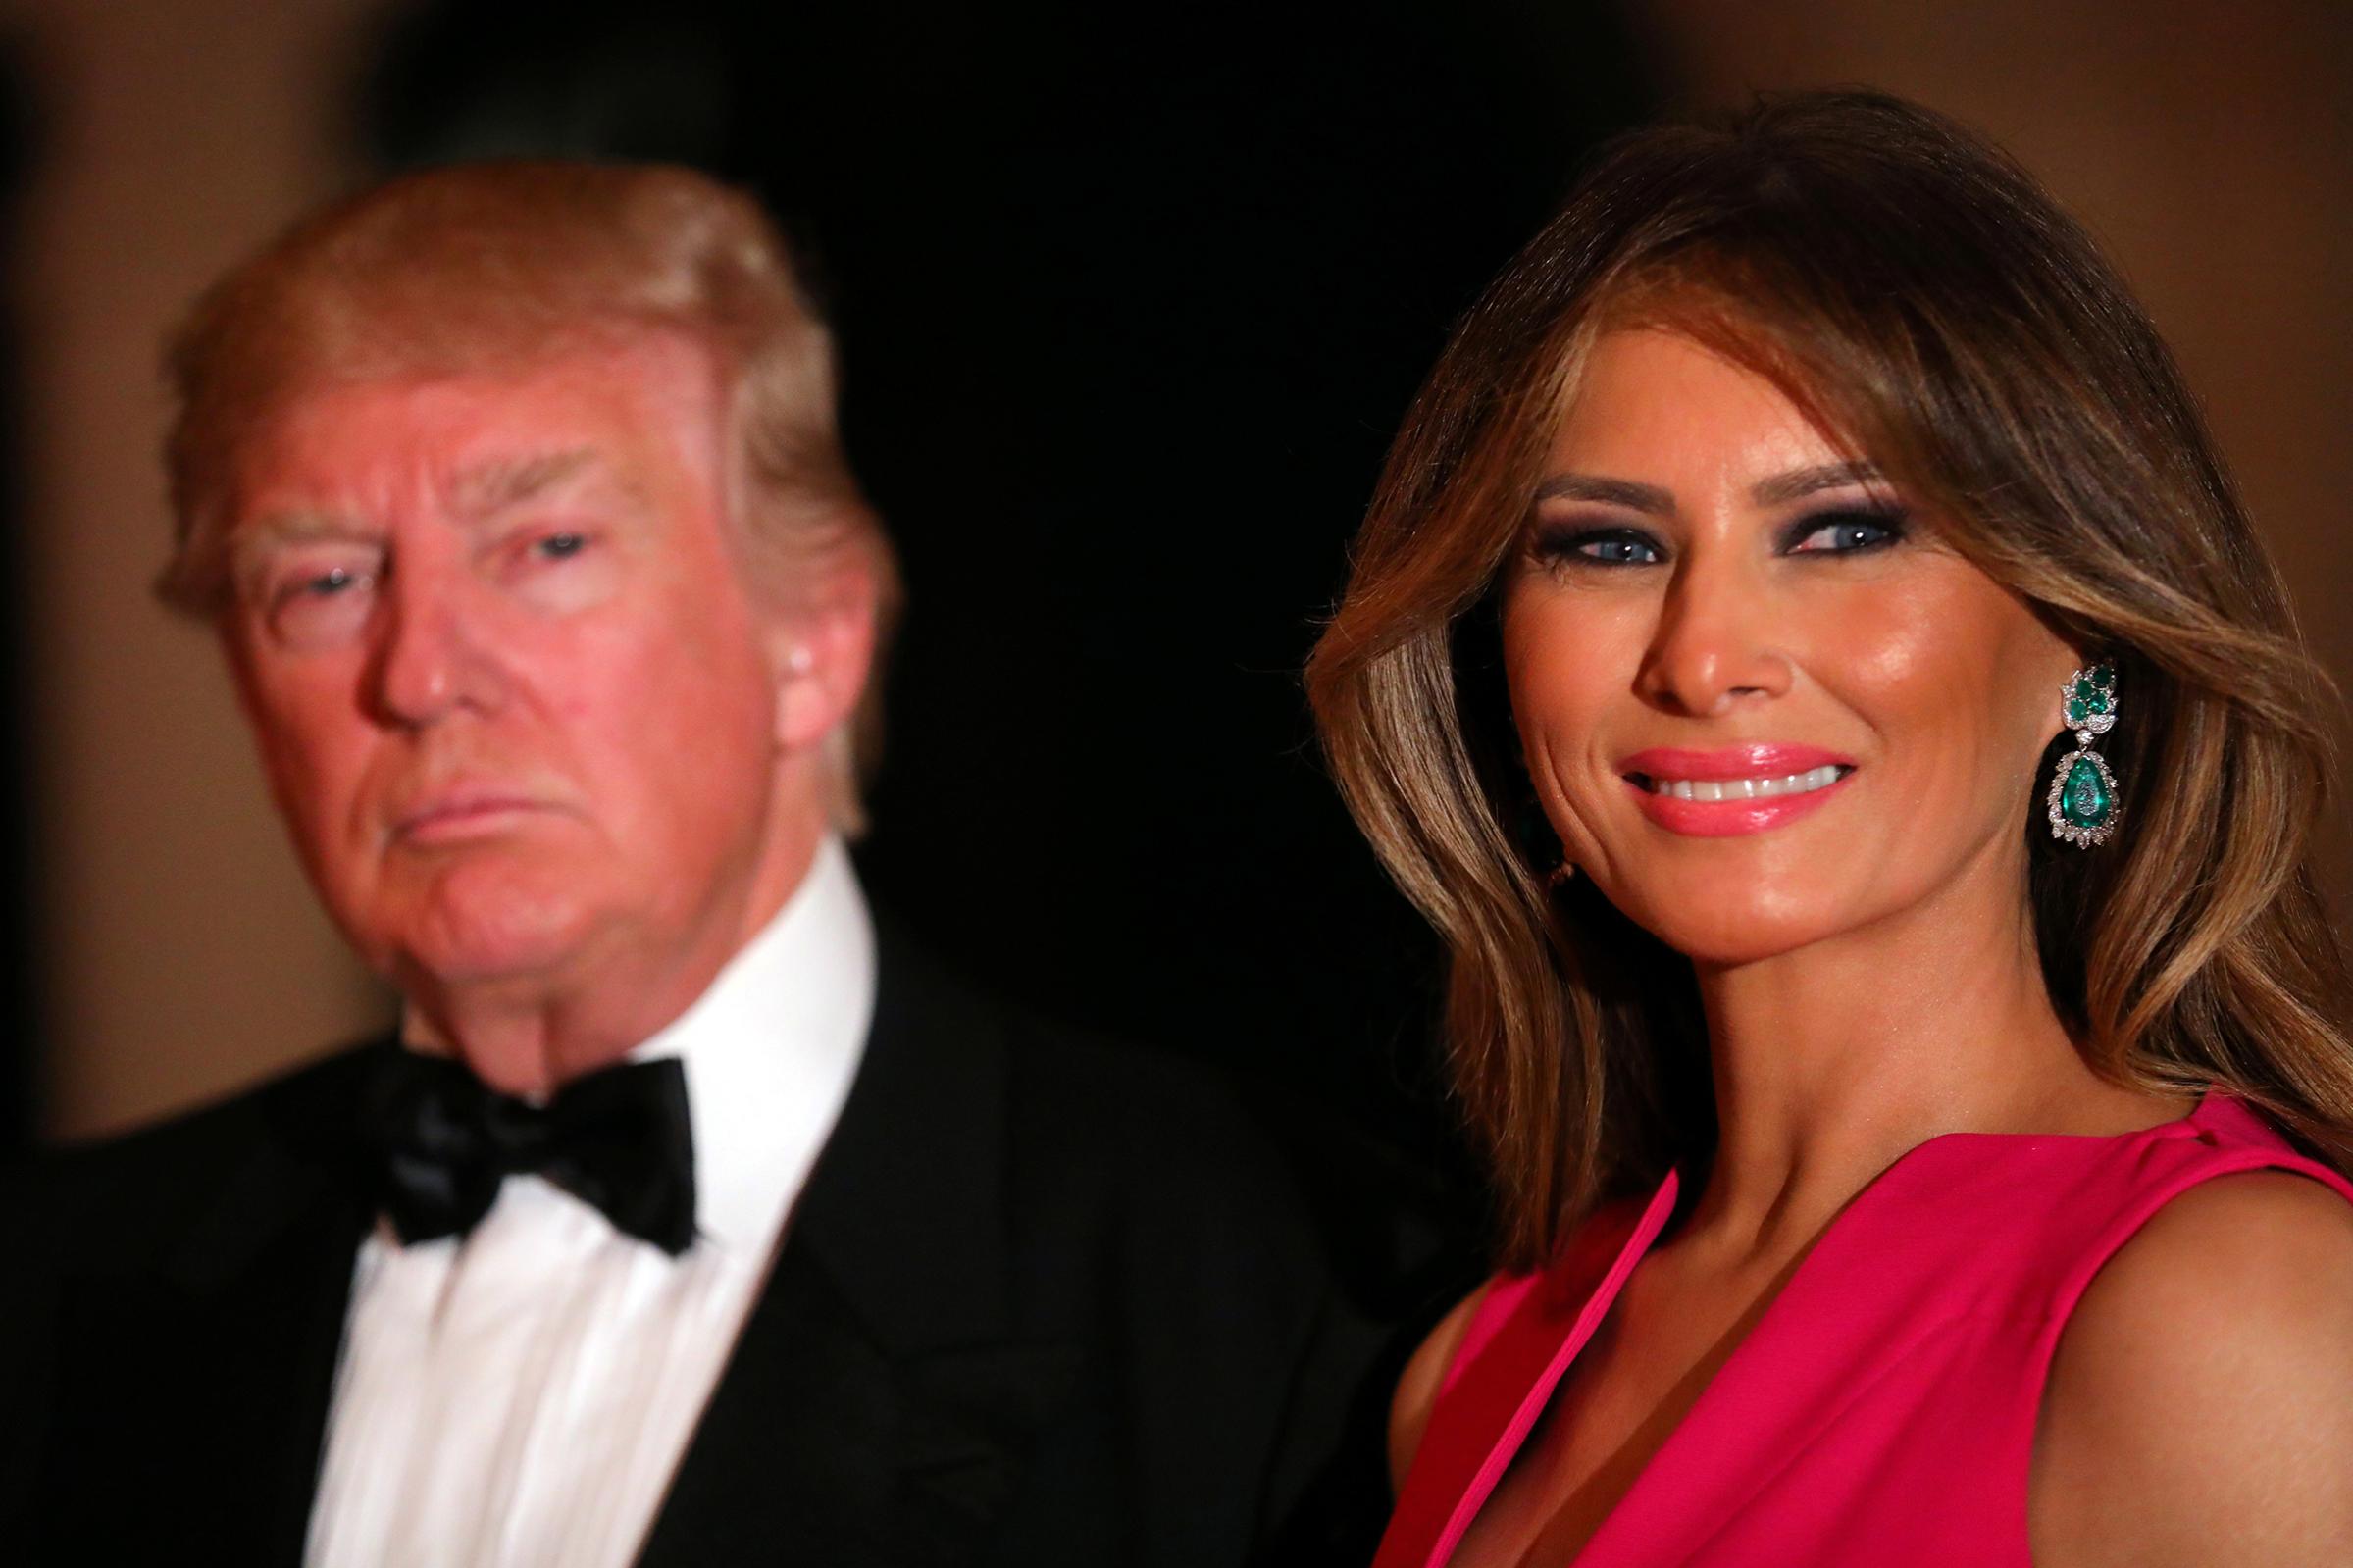 First Lady Melania Trump wearing bright pink Dior gown with emerald and diamond earrings, attends the 60th Annual Red Cross Gala at Mar-a-Lago club in Palm Beach, Fla, Feb. 4, 2017. p and First Lady Melania Trump attend the 60th Annual Red Cross Gala at Mar-a-Lago club in Palm Beach, Florida, U.S